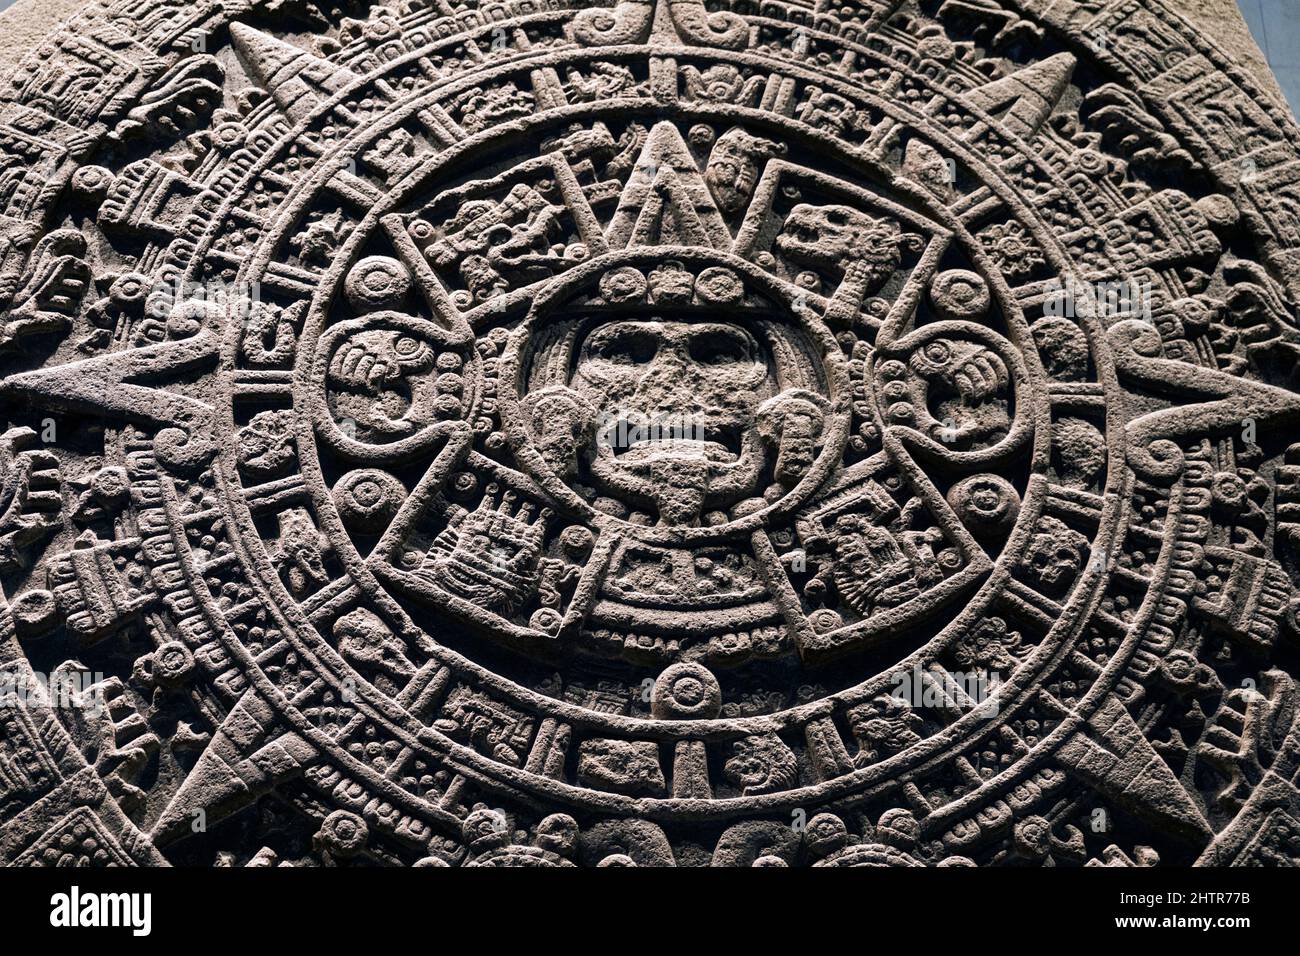 Mexico, Mexico City, The Aztec sun stone (Spanish: Piedra del Sol) is a late post-classic Mexica sculpture housed in the National Anthropology Museum Stock Photo